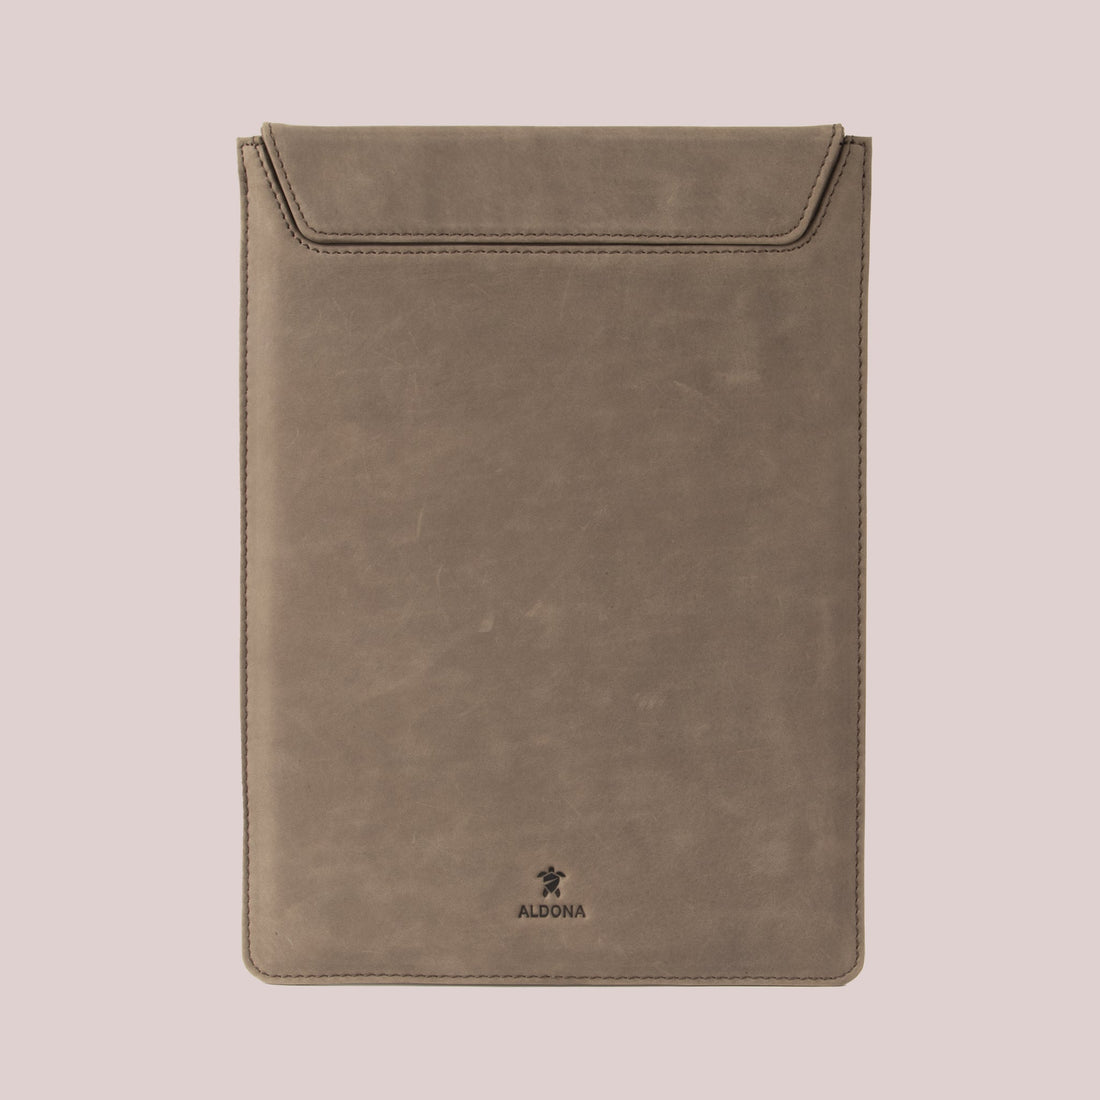 Order online Macbook leather sleeve in a stylish grey color